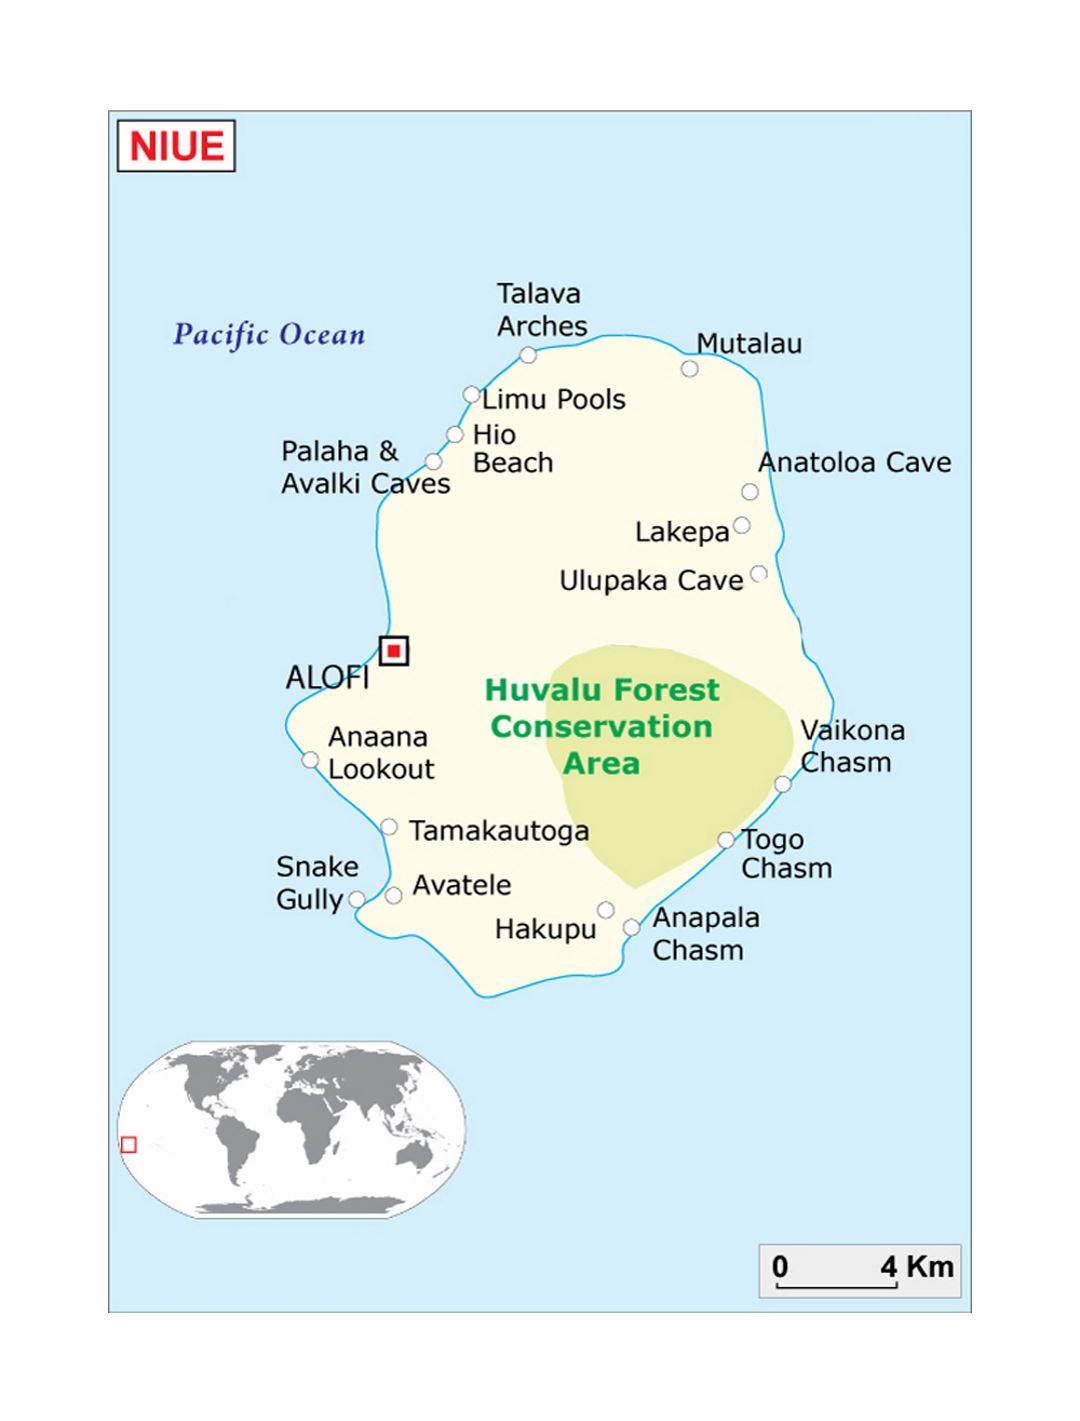 Detailed map of Niue with localities